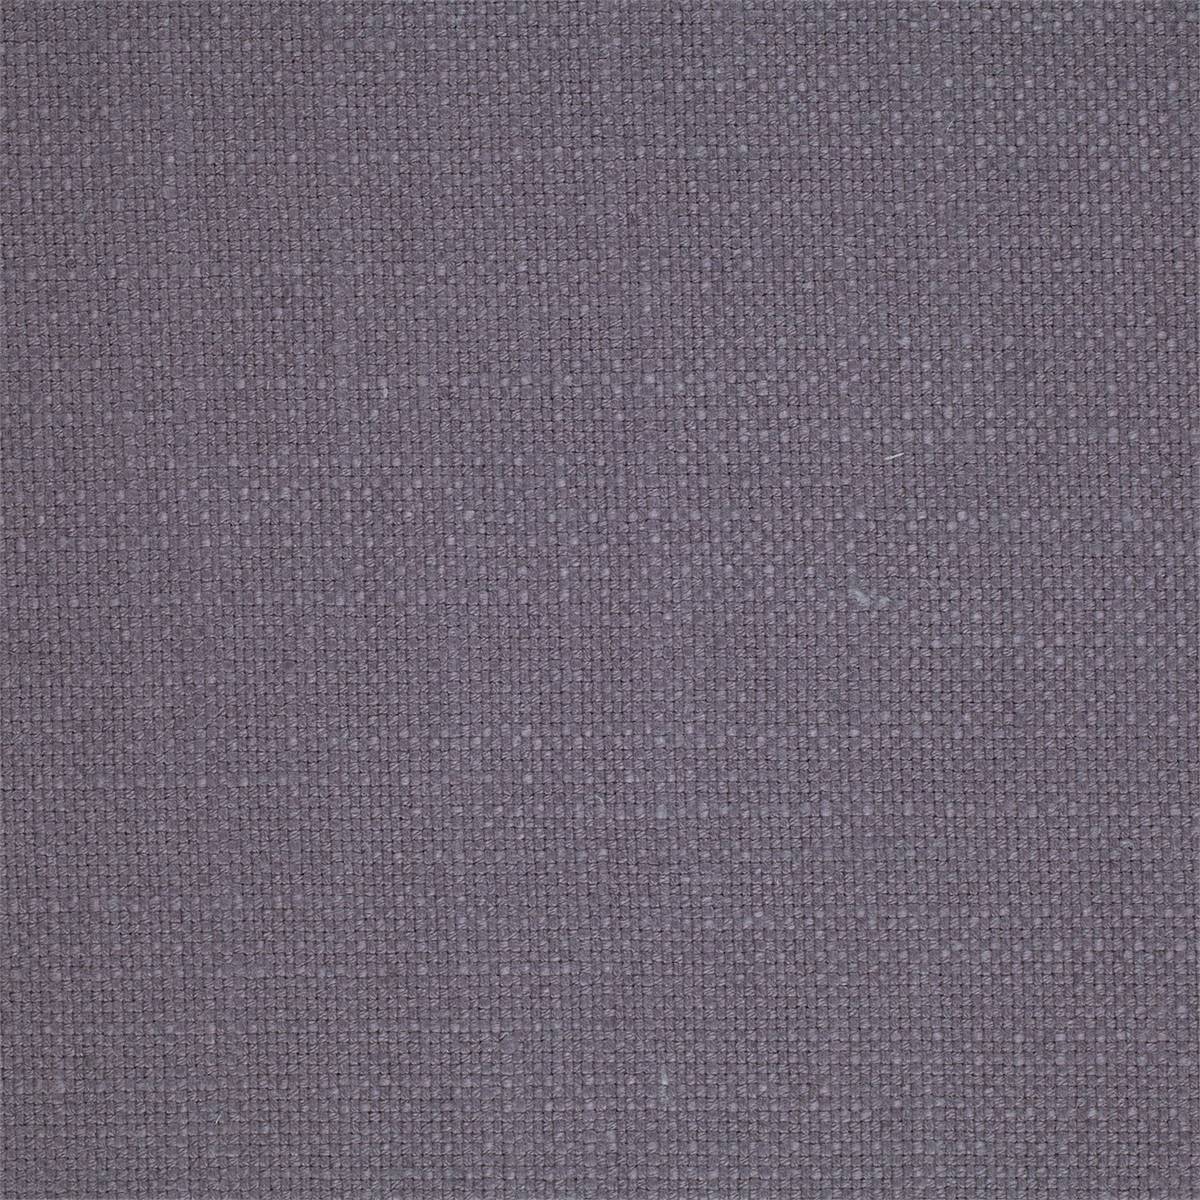 Tuscany Bilberry Fabric by Sanderson